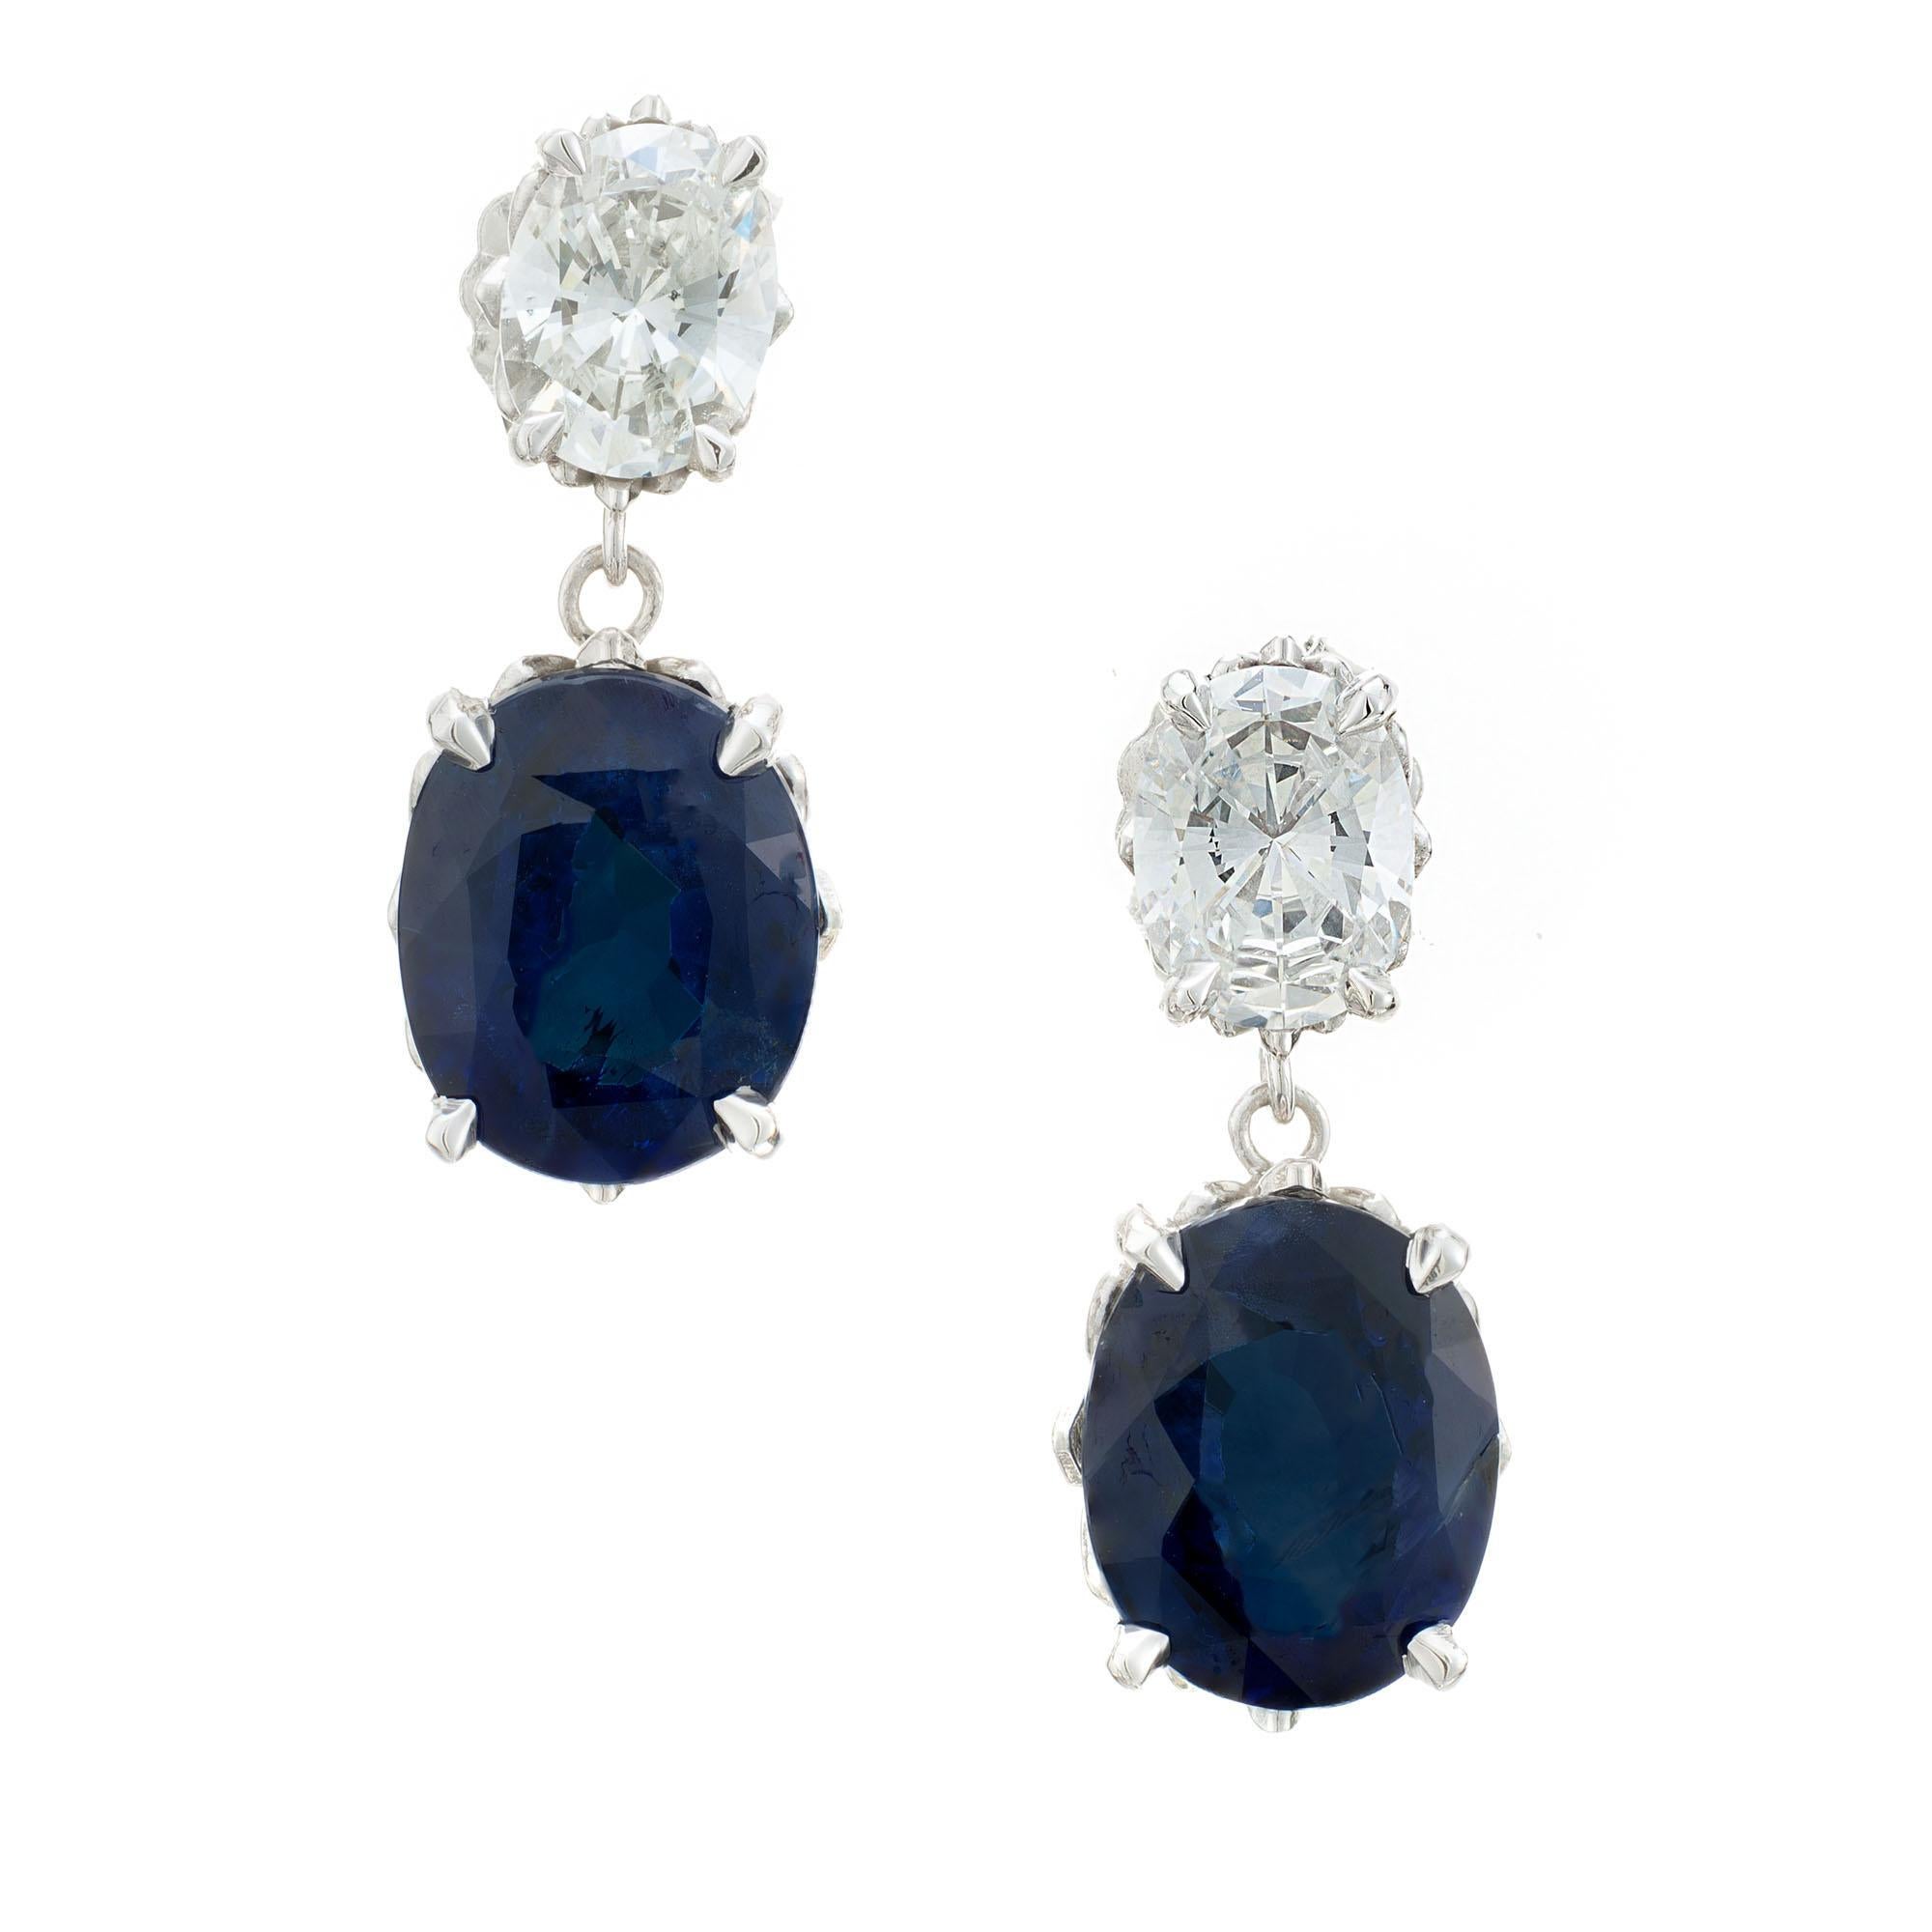 Sapphire and diamond dangle earrings. 2 deep blue oval GIA certified sapphires with 2 oval GIA certified diamonds, set in platinum scroll gallery settings. Both sapphires are certified natural no heat, no enhancement. Designed and crafted in the